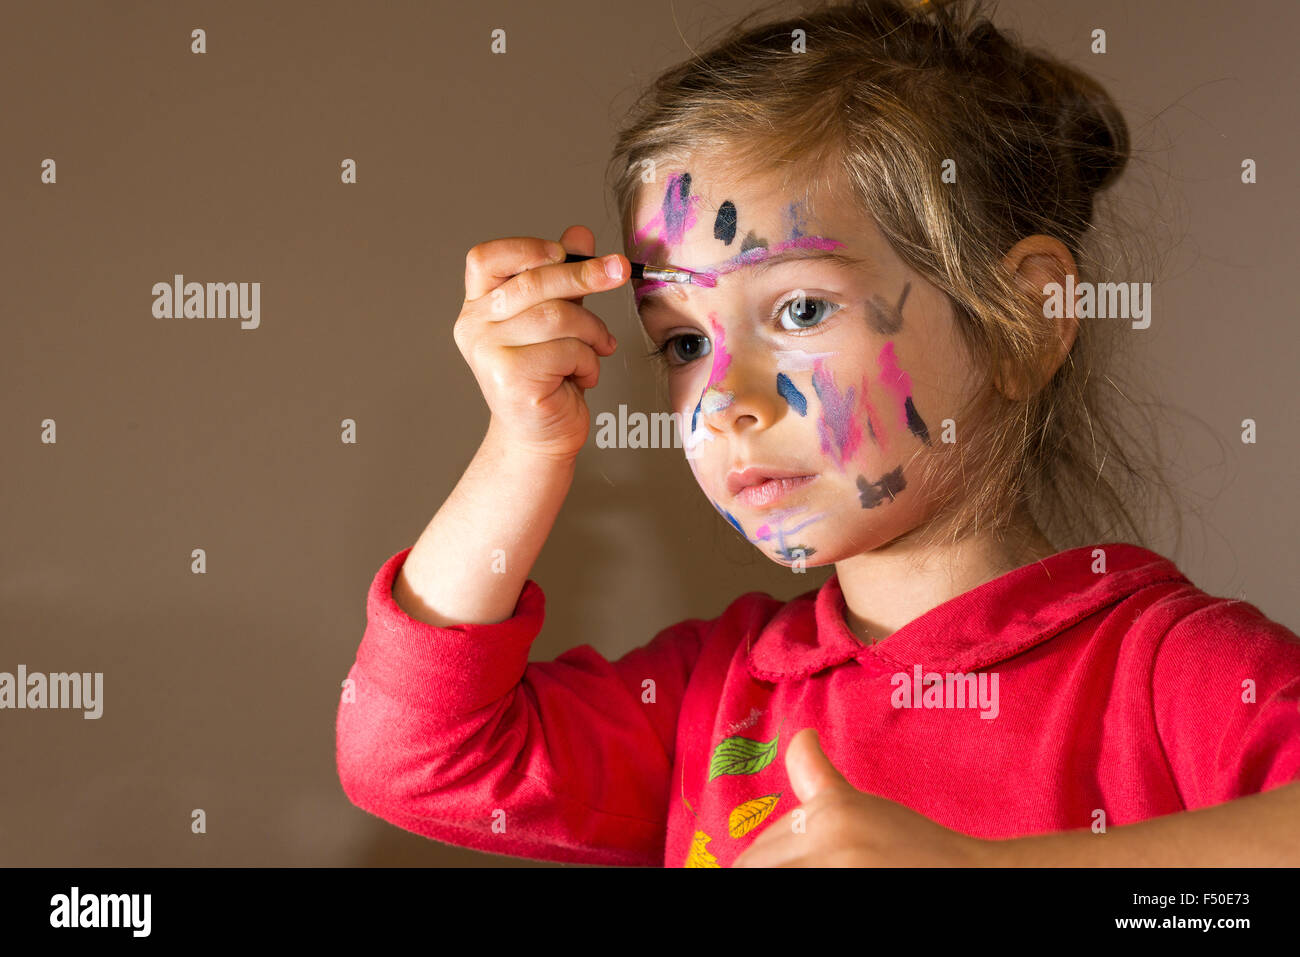 A little girl, wearing a red sweater, is painting her face with colorful watercolor Stock Photo